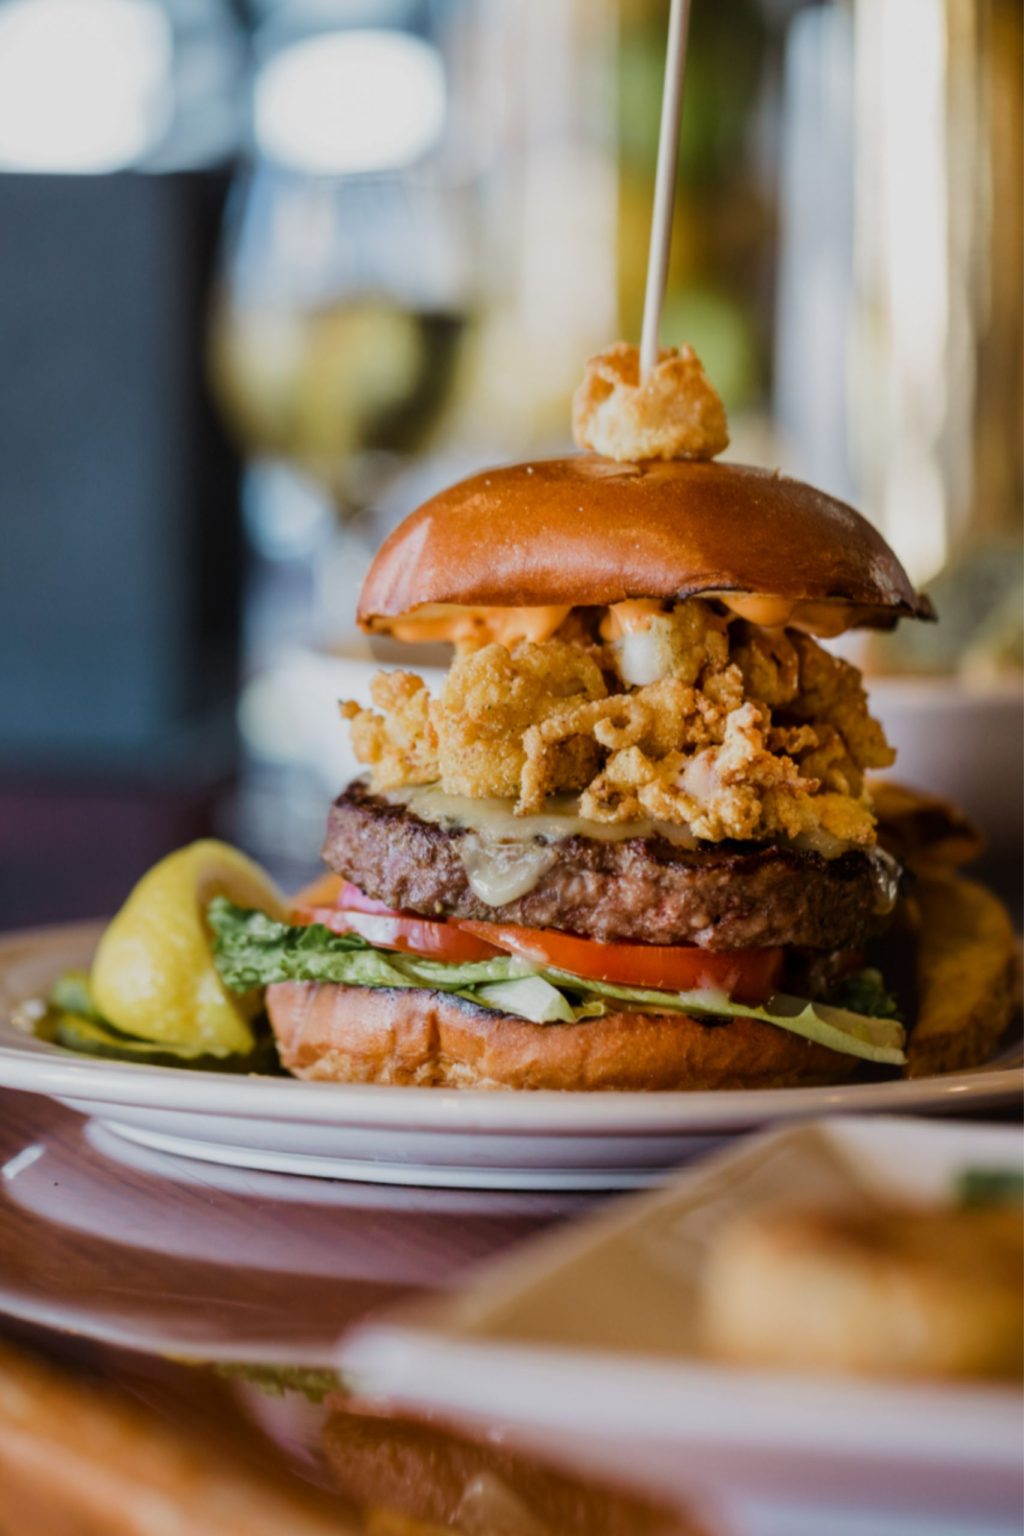 A cheeseburger sits on a plate. It has fried clams, cheese, meat, tomatoes, and lettuce on it.